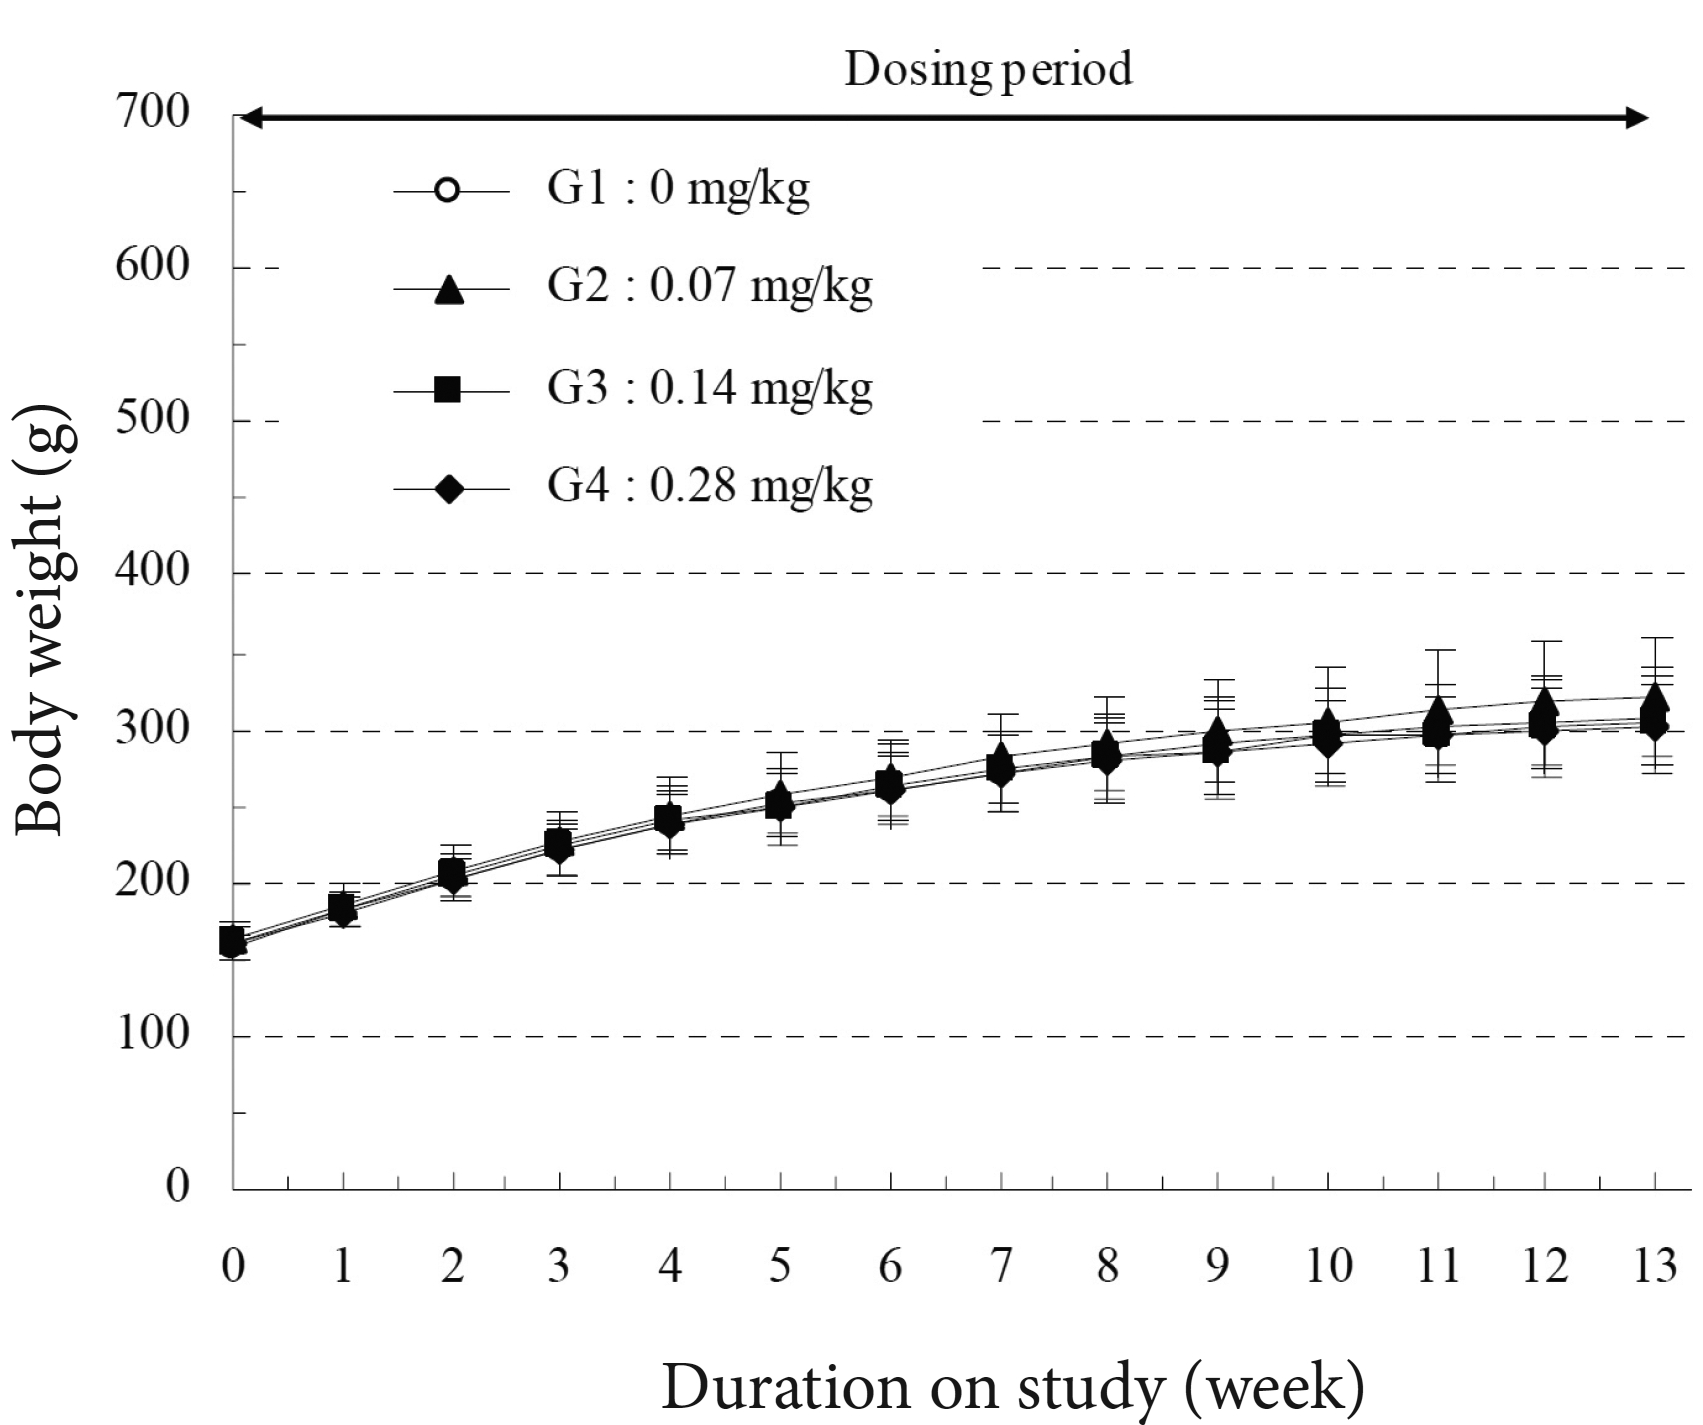 Body weights of the female SD rats during 13-week, repeated intramuscular dose, toxicity study. The female groups show no significant
changes in weight (Dunnett’s t-test, P > 0.05)